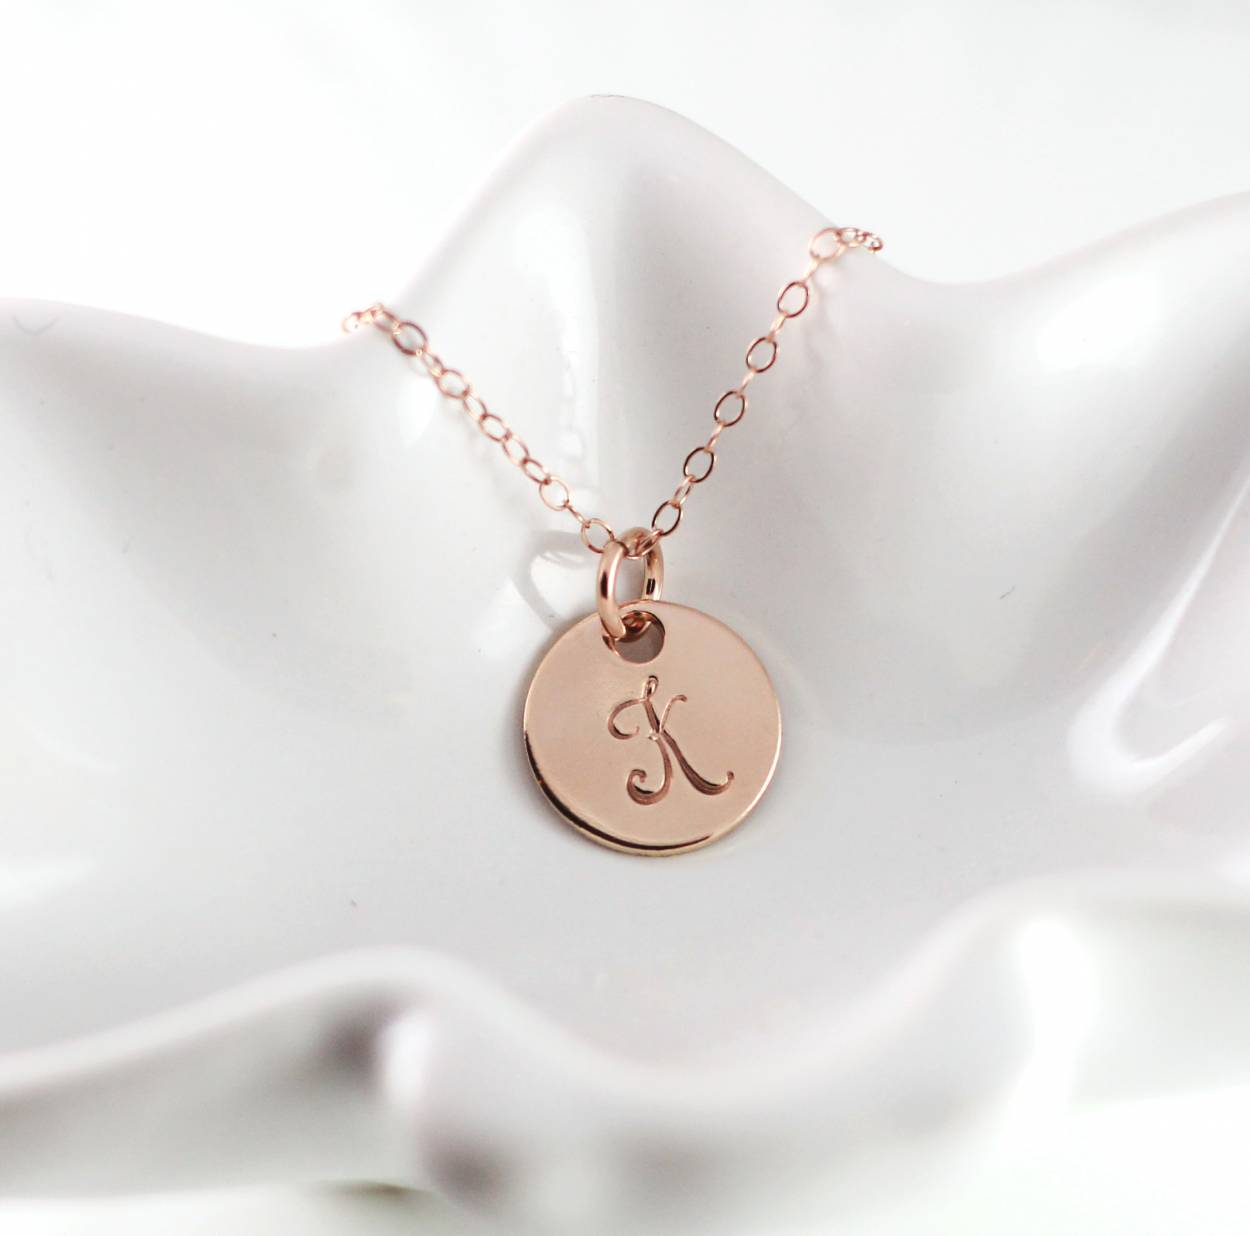 Custom Initial Necklace - Your choice of metal